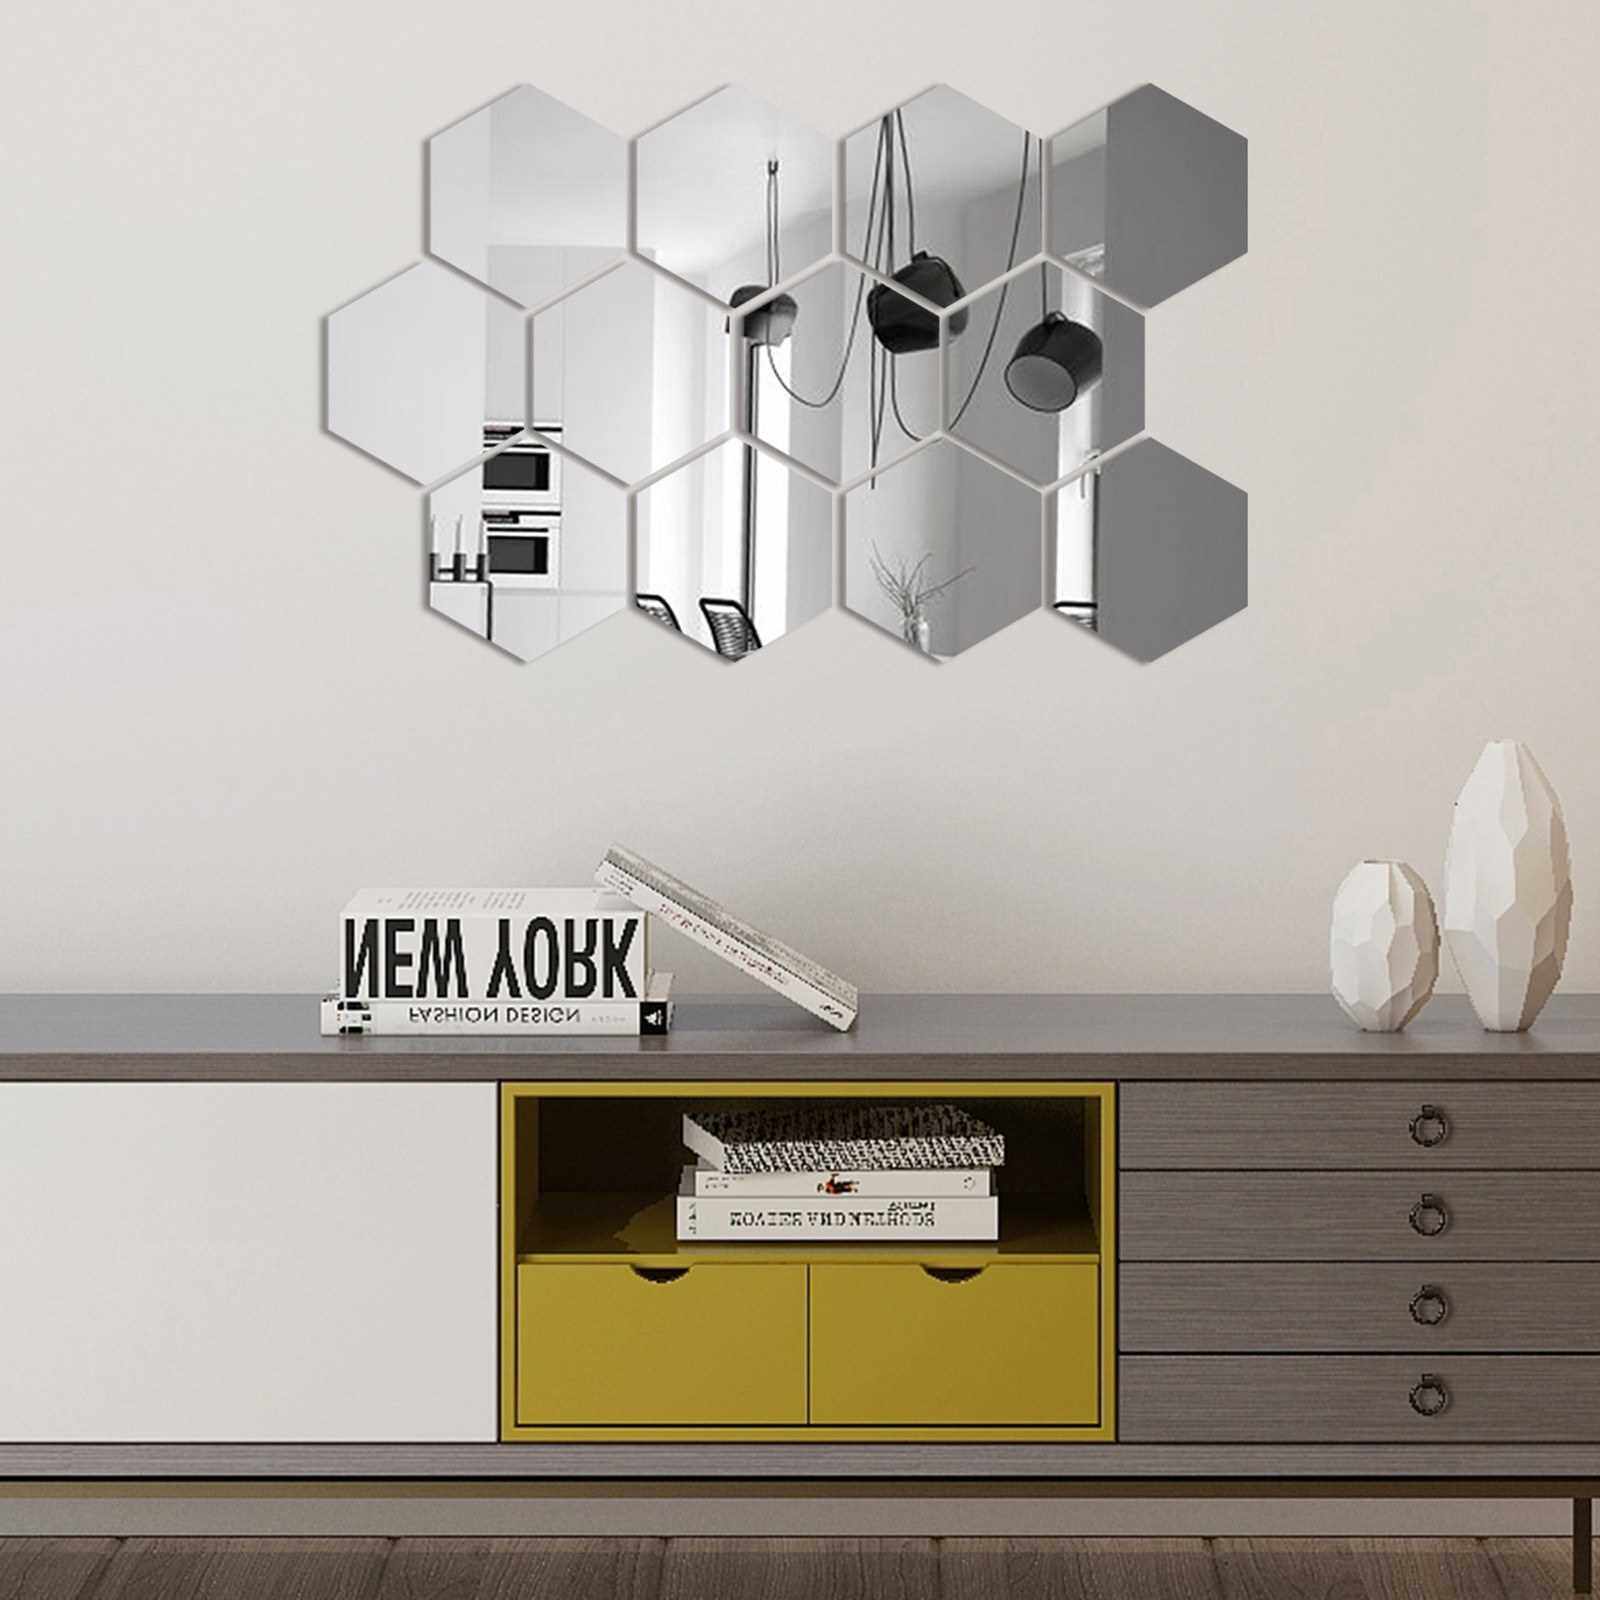 Best Selling 12PCS Mirror Wall Decals Hexagon Wall Stickers Removable Acrylic Decorative Mirror DIY Home Decorations for Bedroom Bathroom Living Room (Silver)